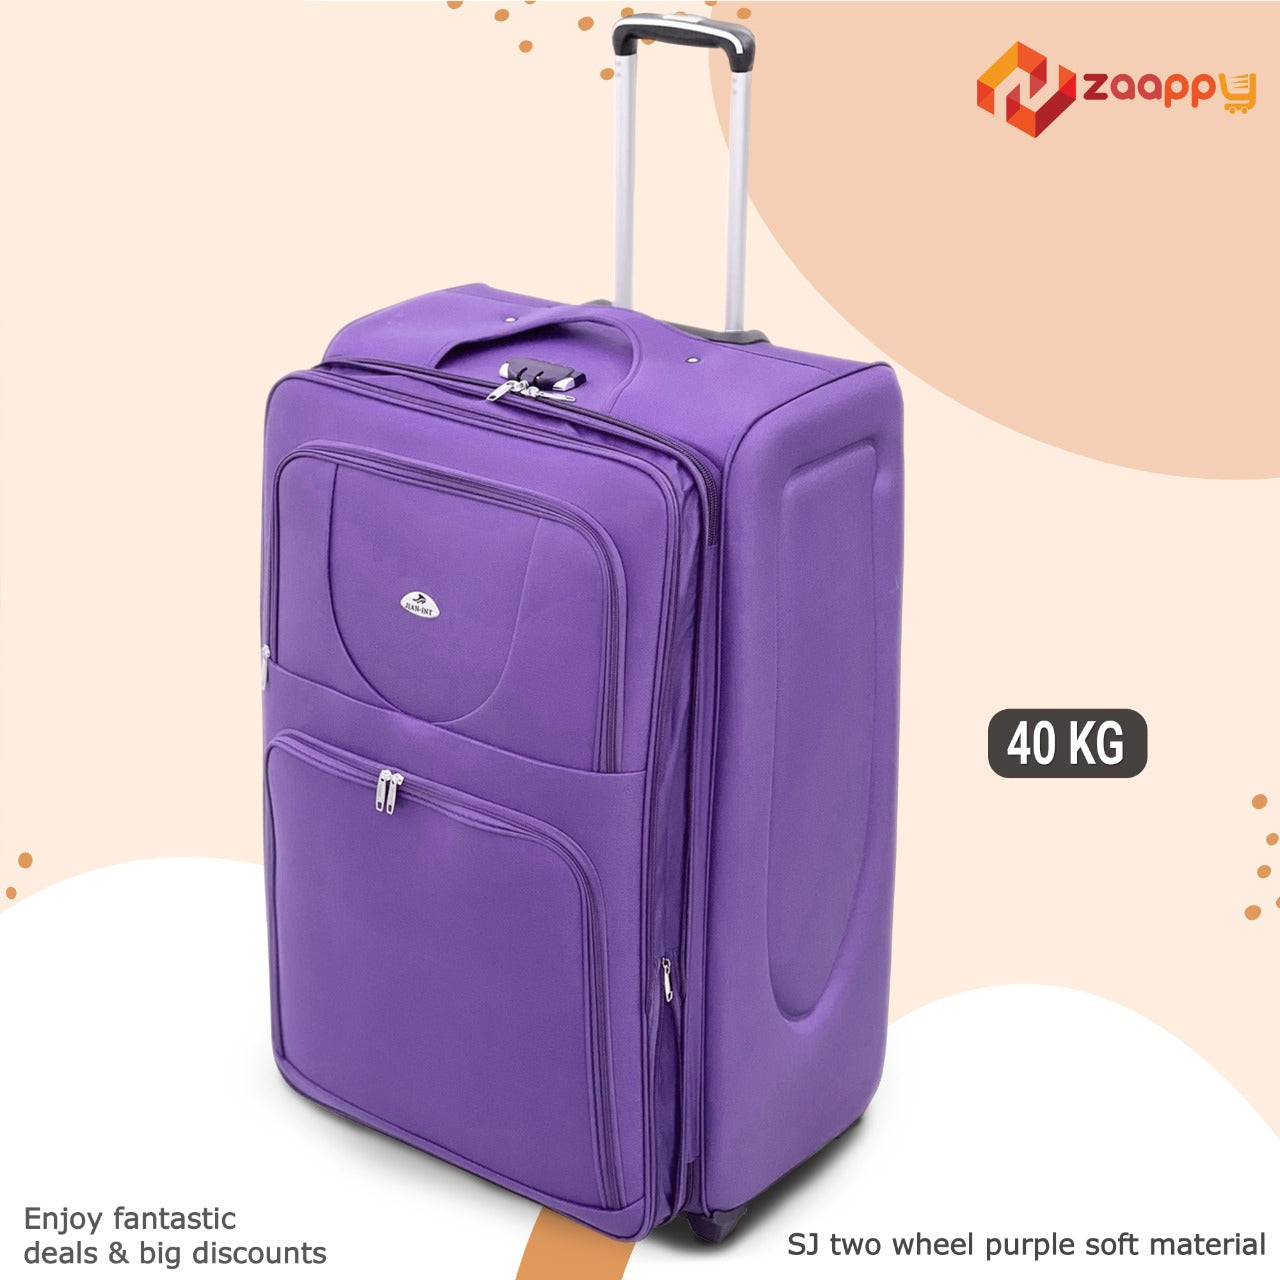 Soft Material Luggage Purple Colour 40-45 Kg 2 Wheel Travel Luggage Zaappy